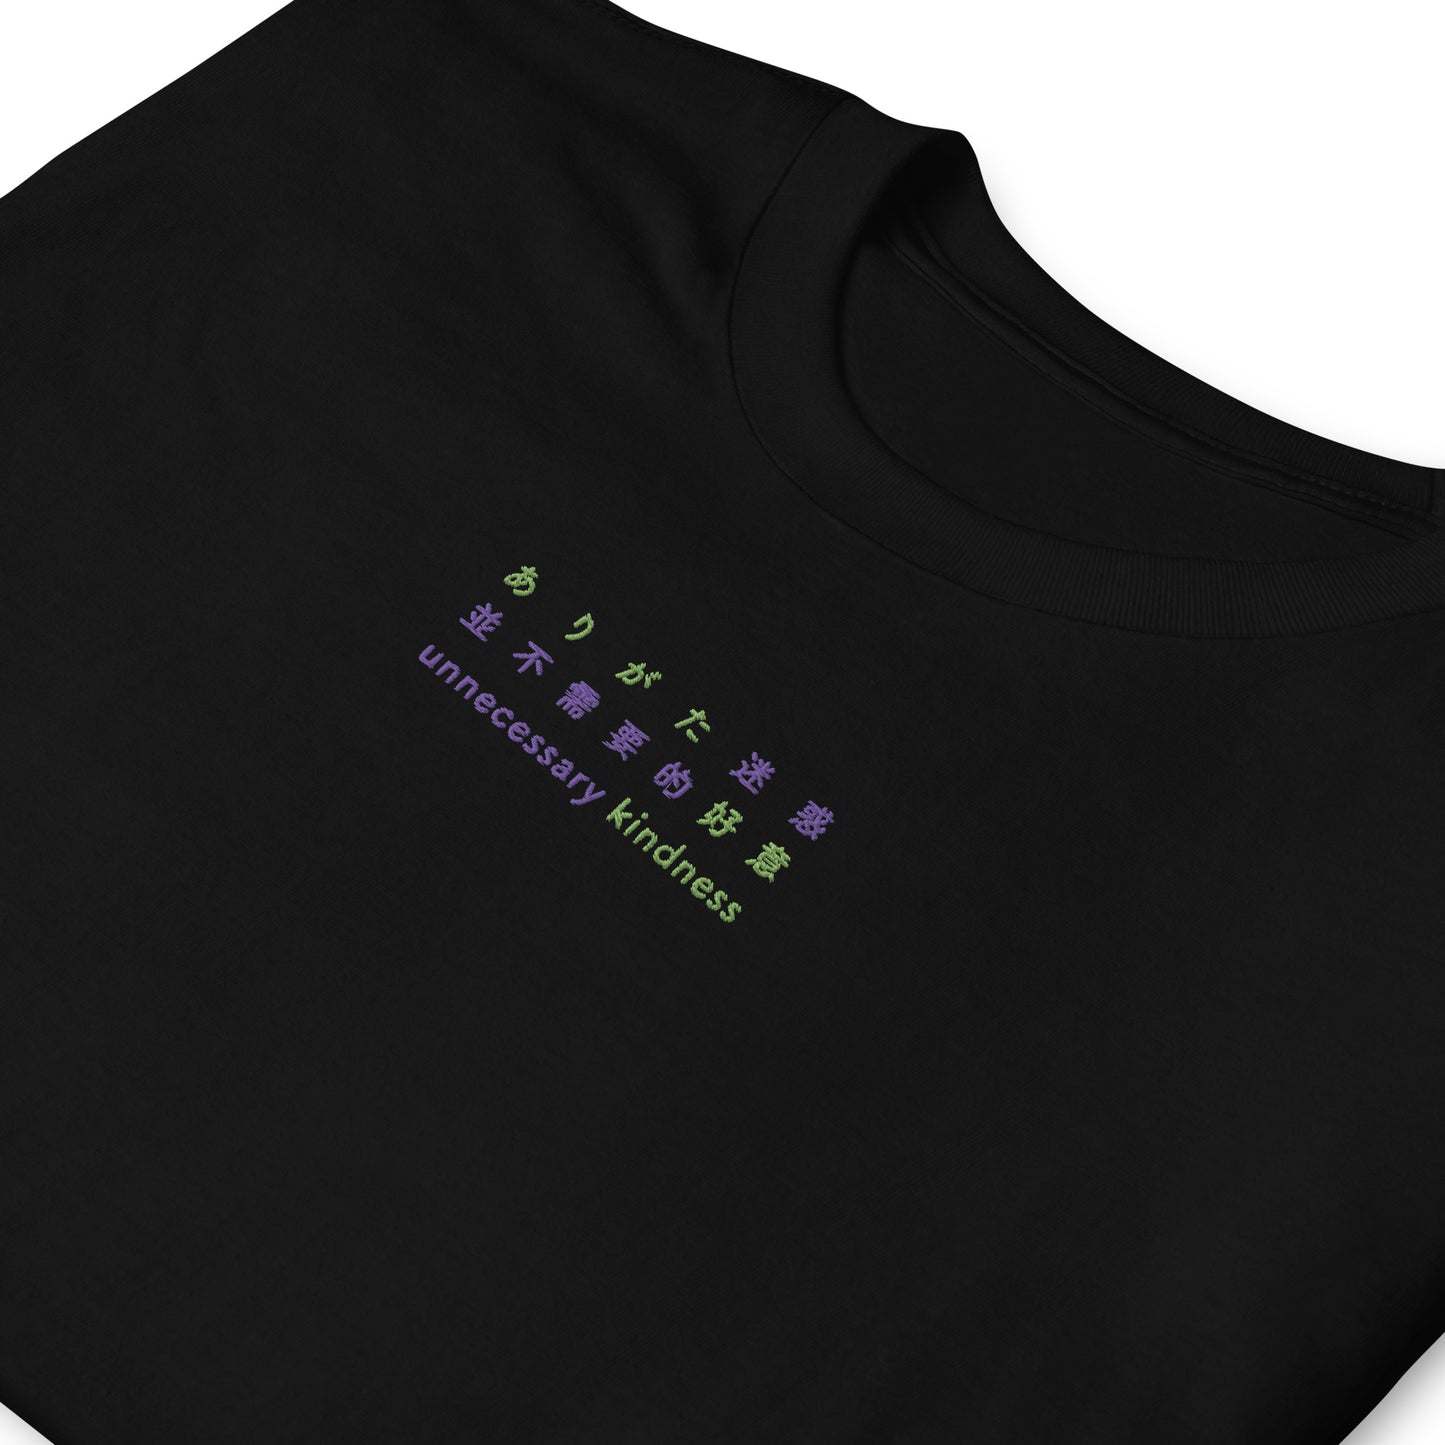 Black High Quality Tee - Front Design with Green and Purple Embroidery "Unnecessary Kindness" in Japanese ,Chinese and English